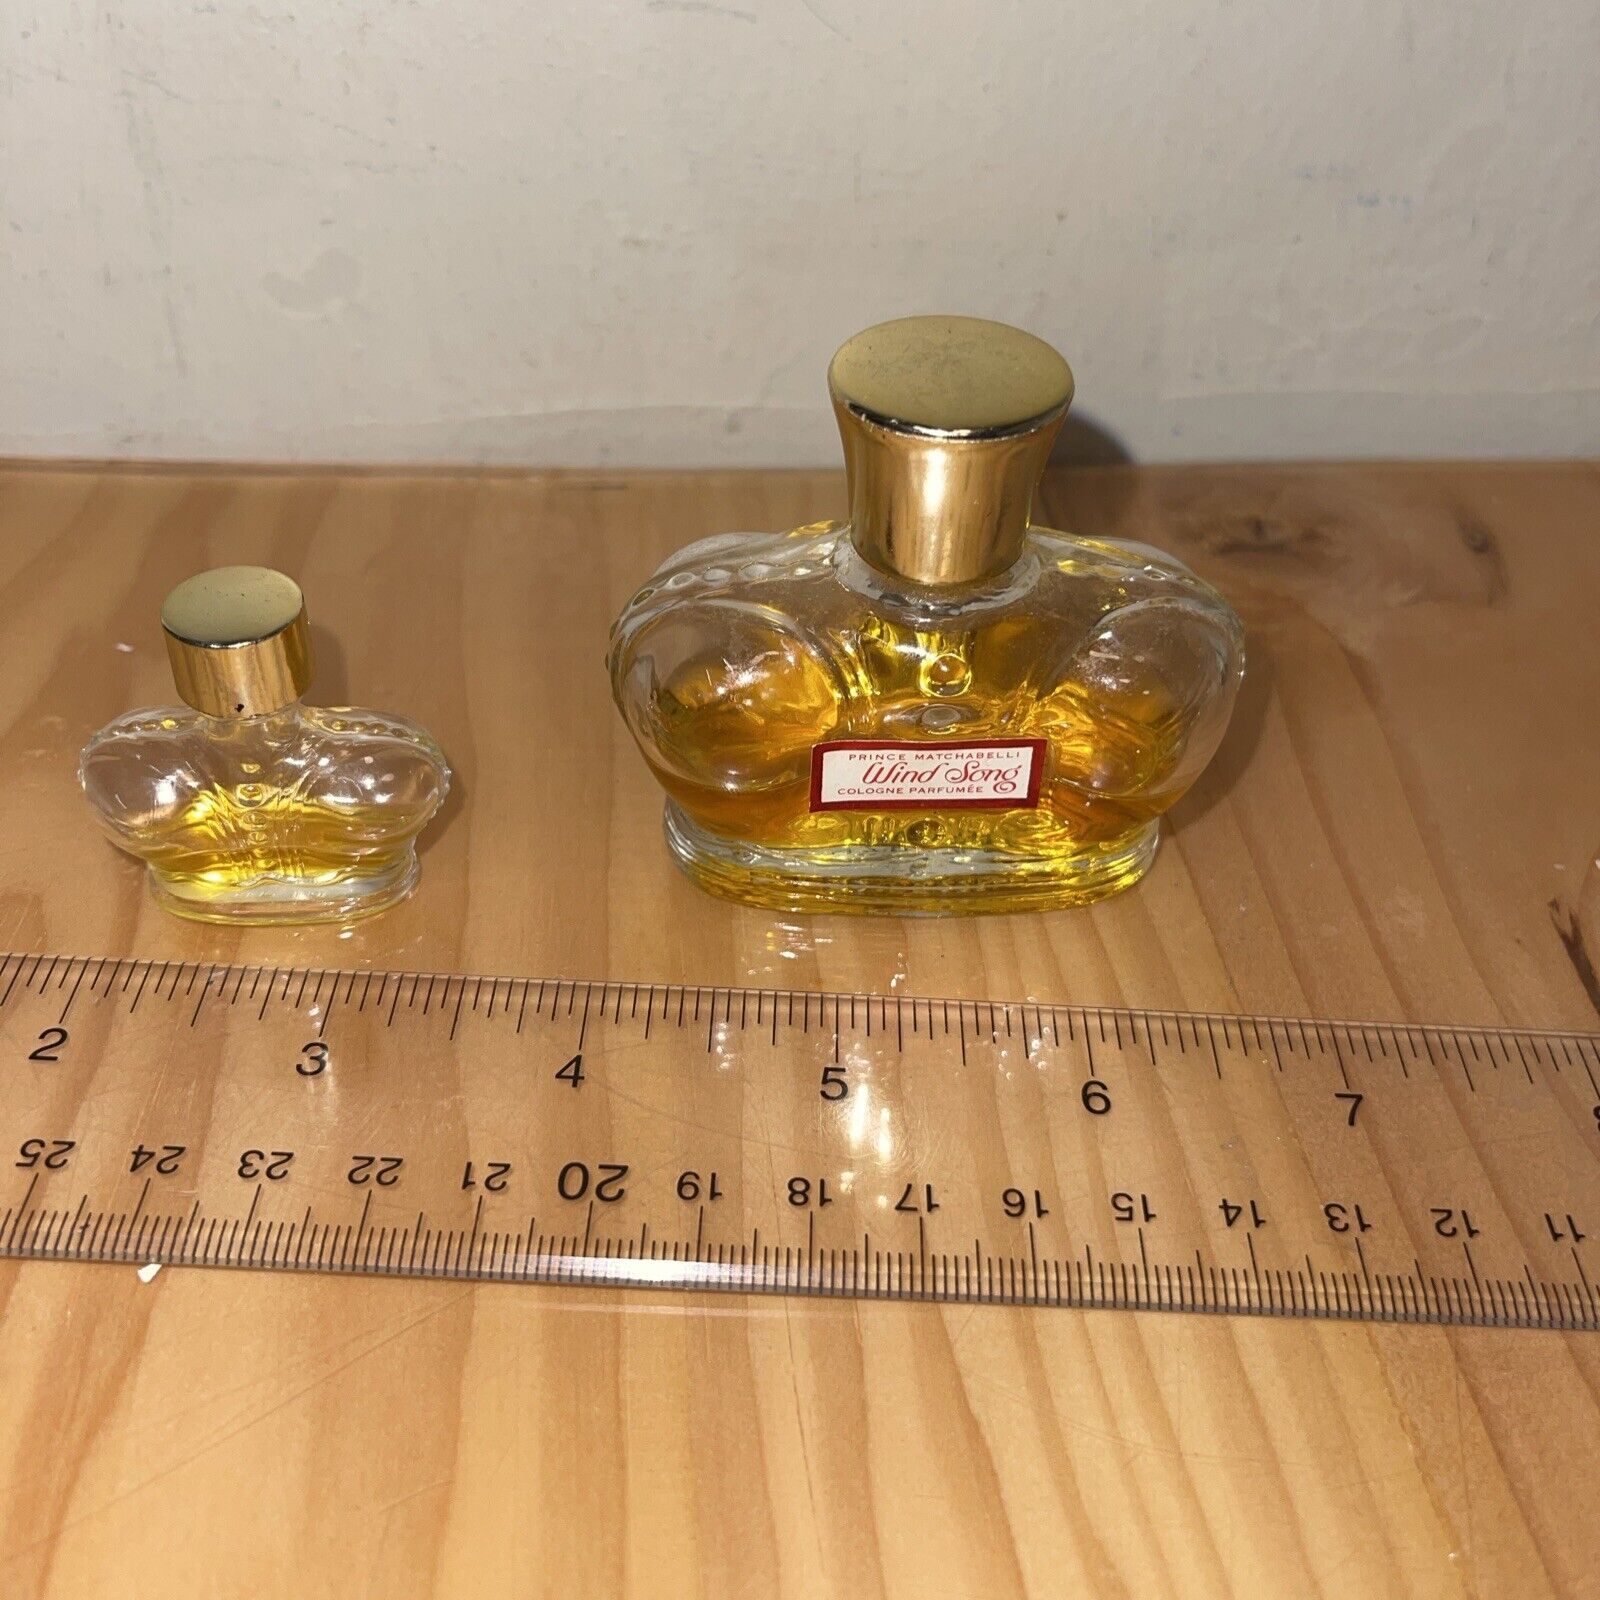 VINTAGE PRINCE MATCHABELLI WIND SONG CROWN COLOGNE BOTTLE PERFUME Pair